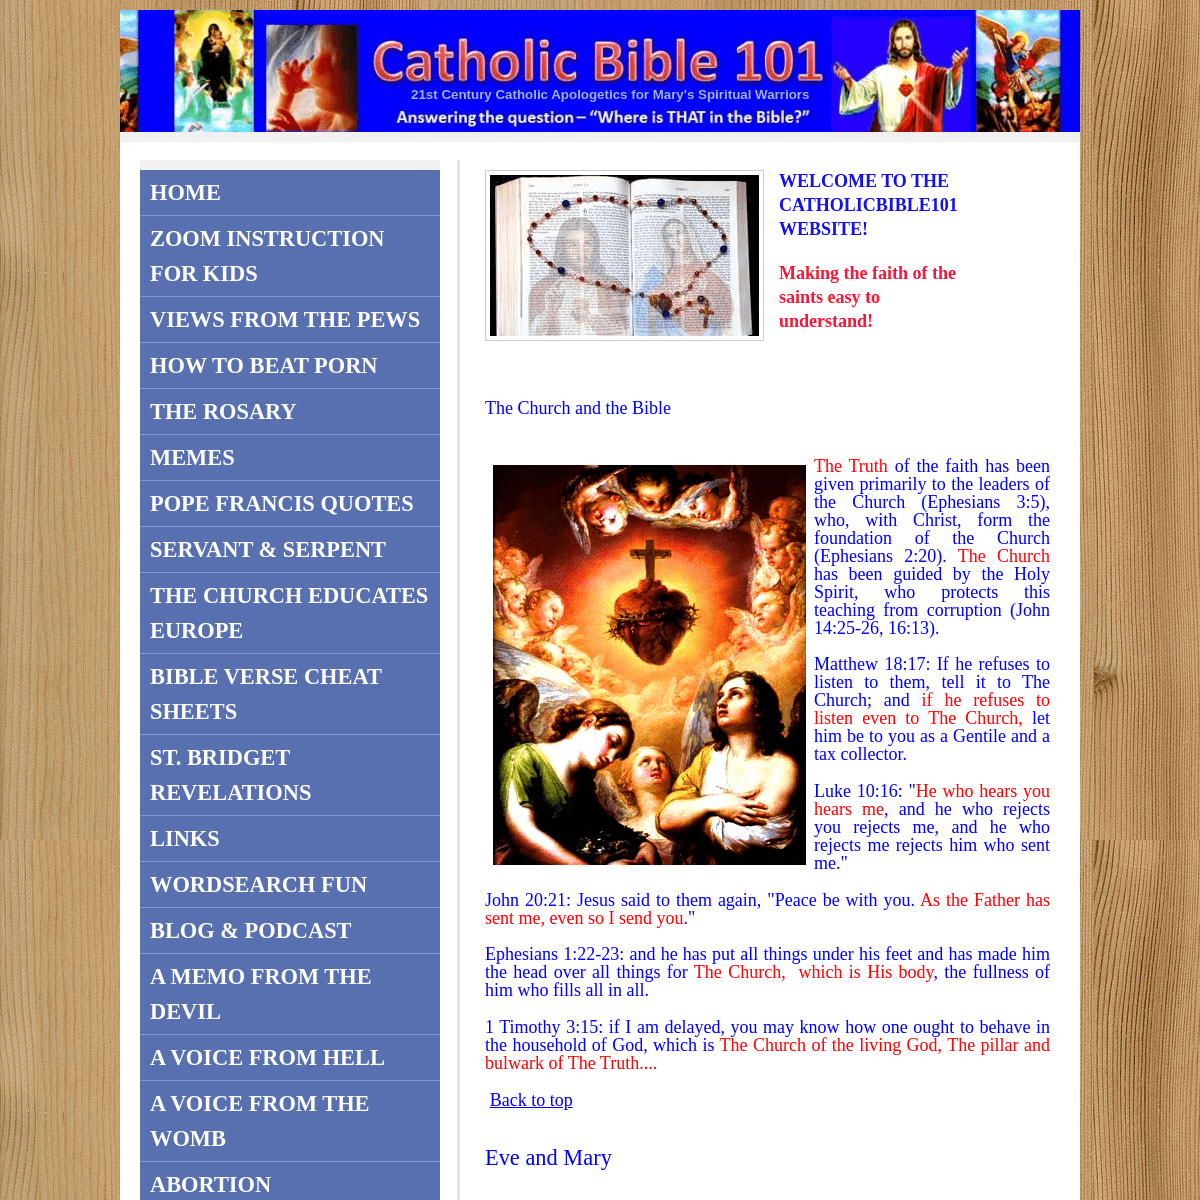 A complete backup of https://catholicbible101.com